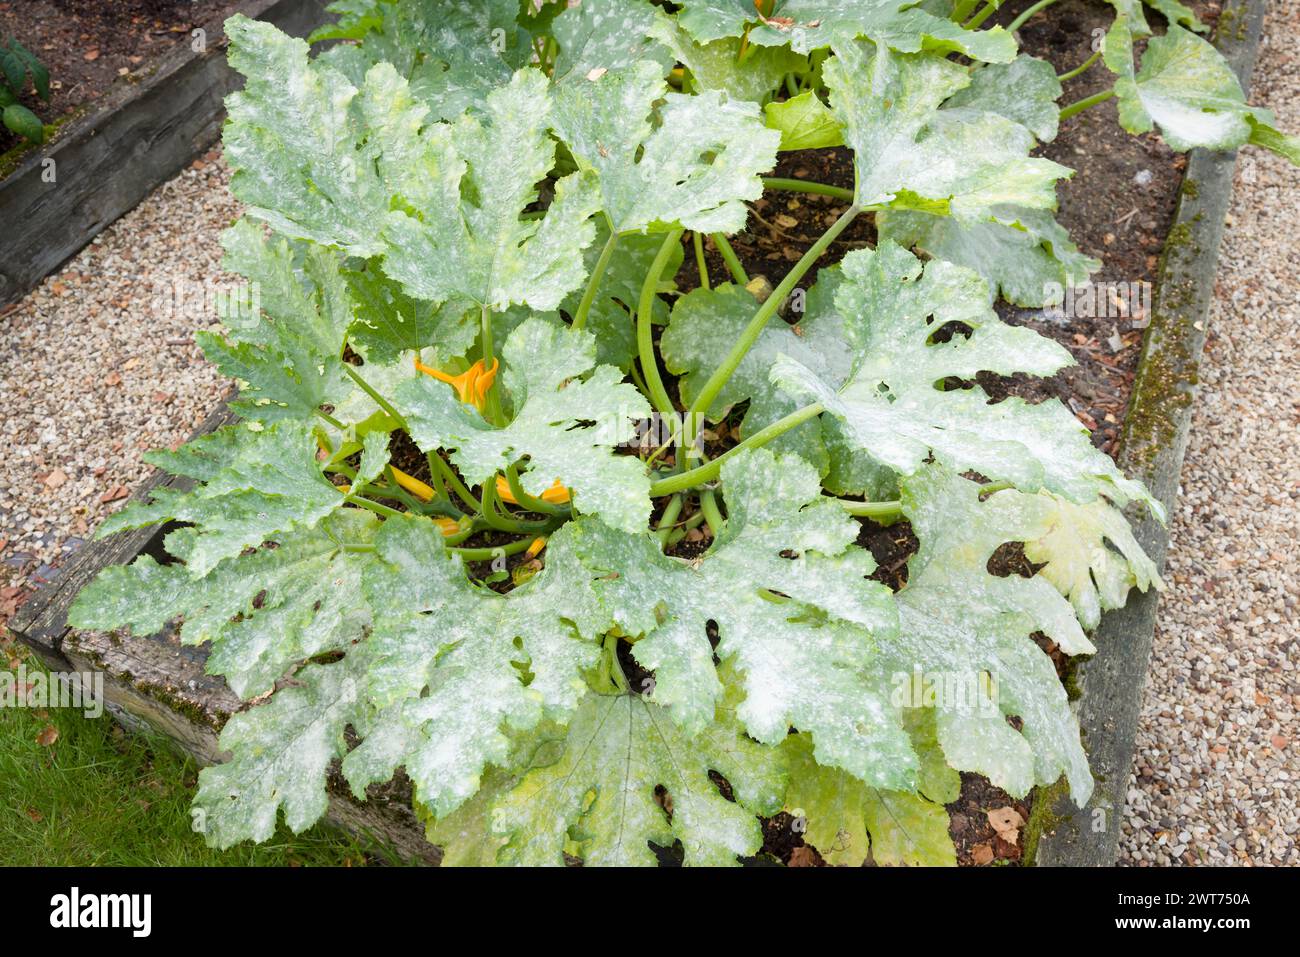 Powdery mildew on the leaves of courgette (zucchini) plants in a vegetable garden, UK Stock Photo